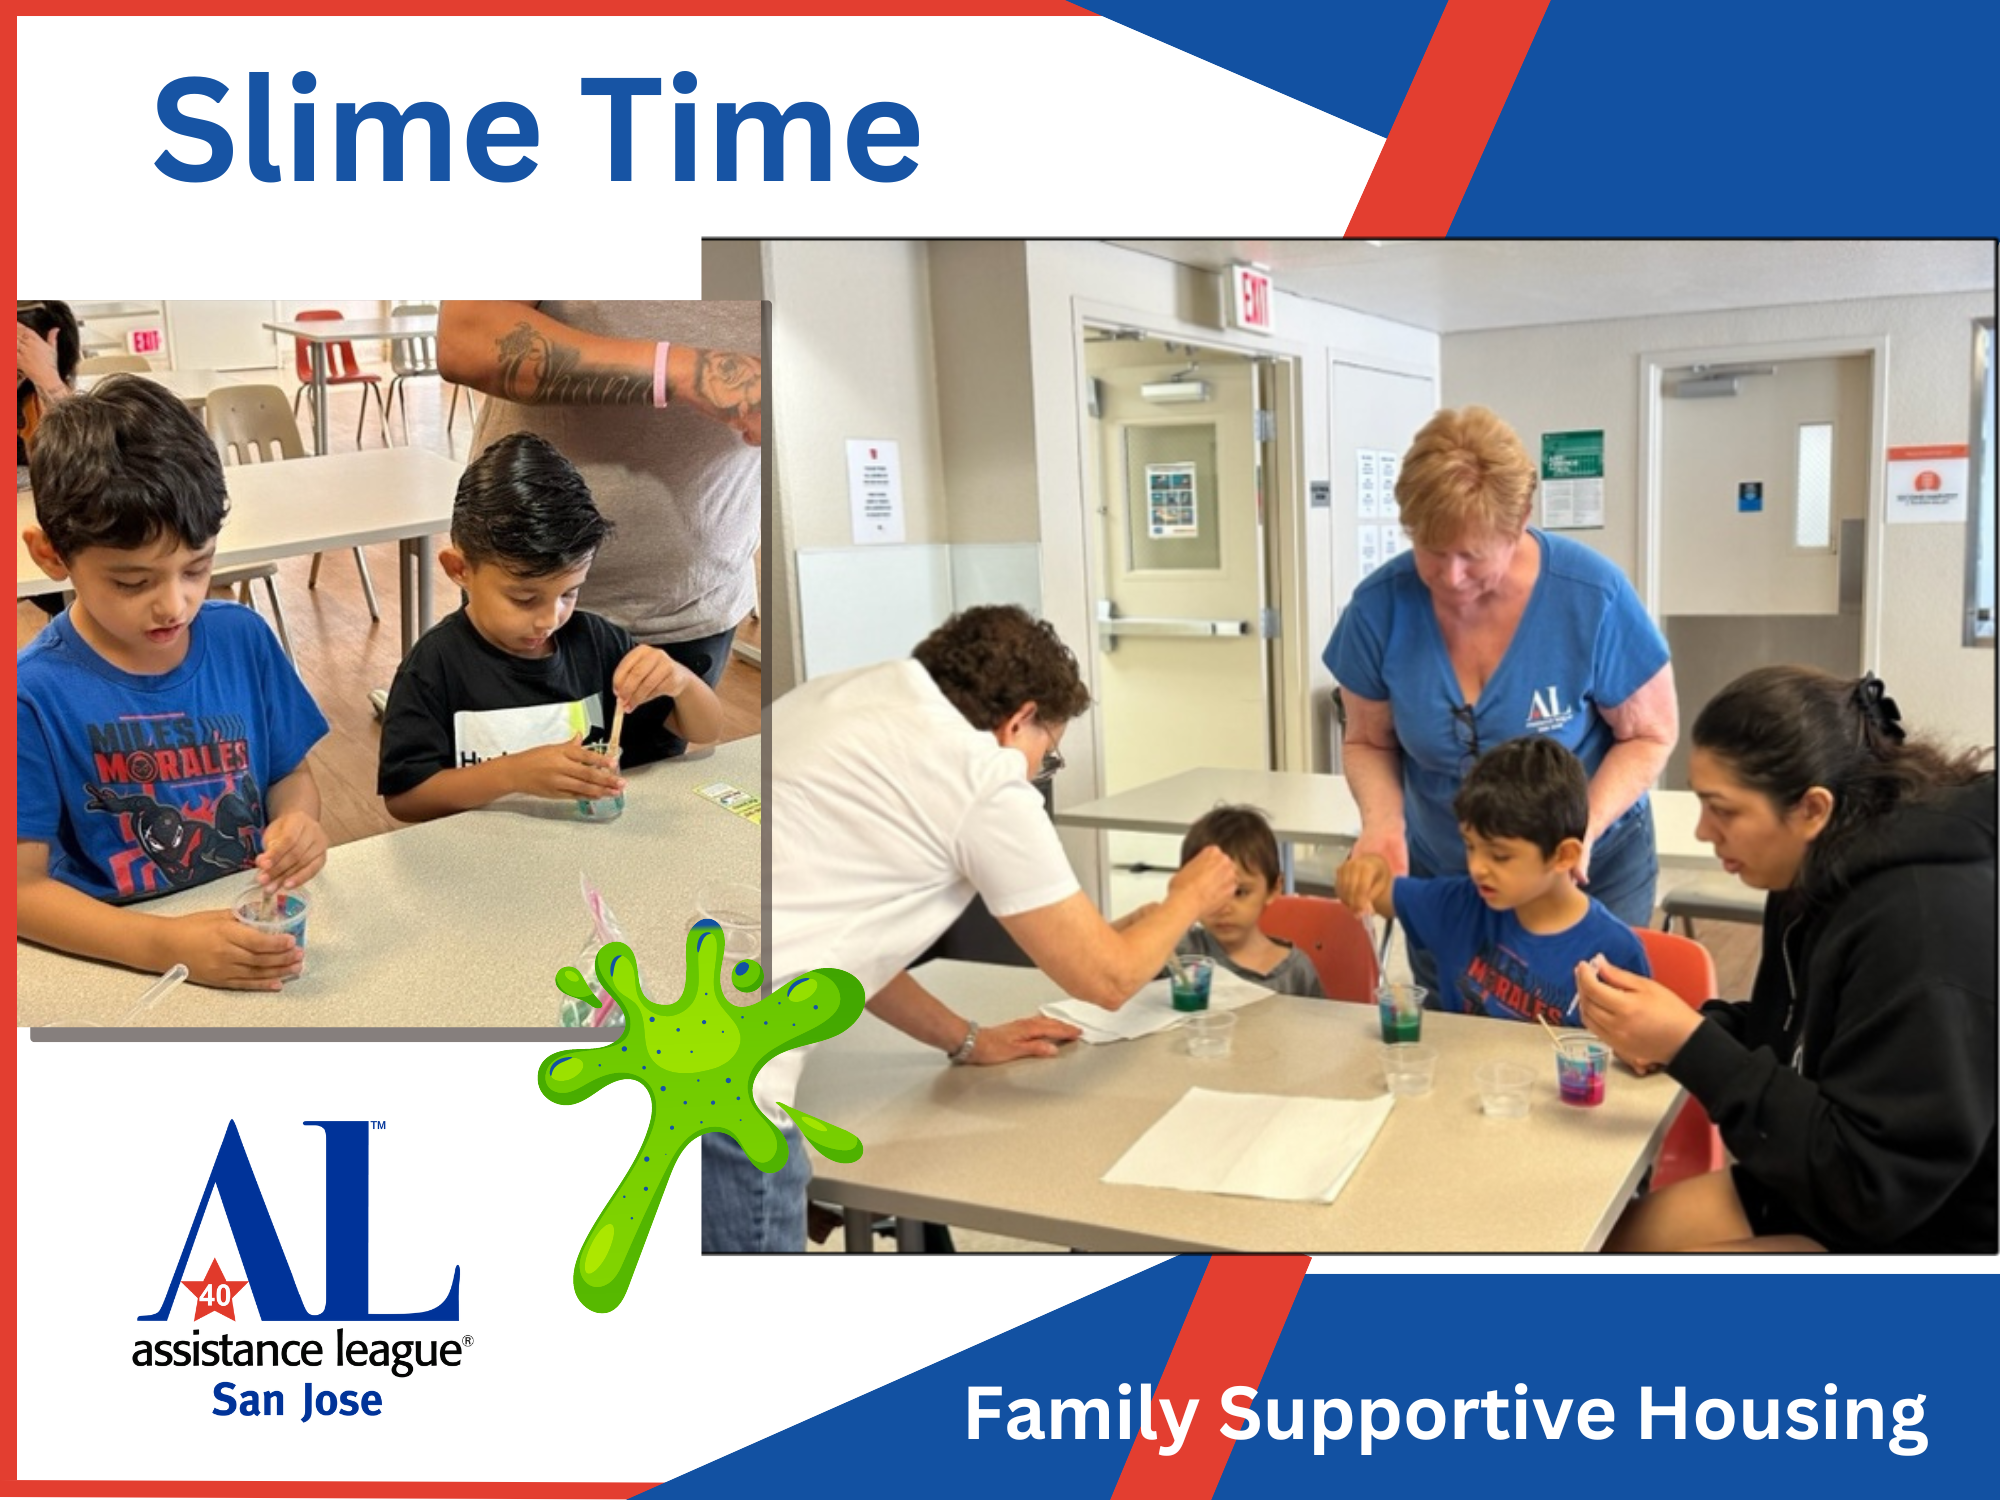 Slime Time at Family Supportive Housing